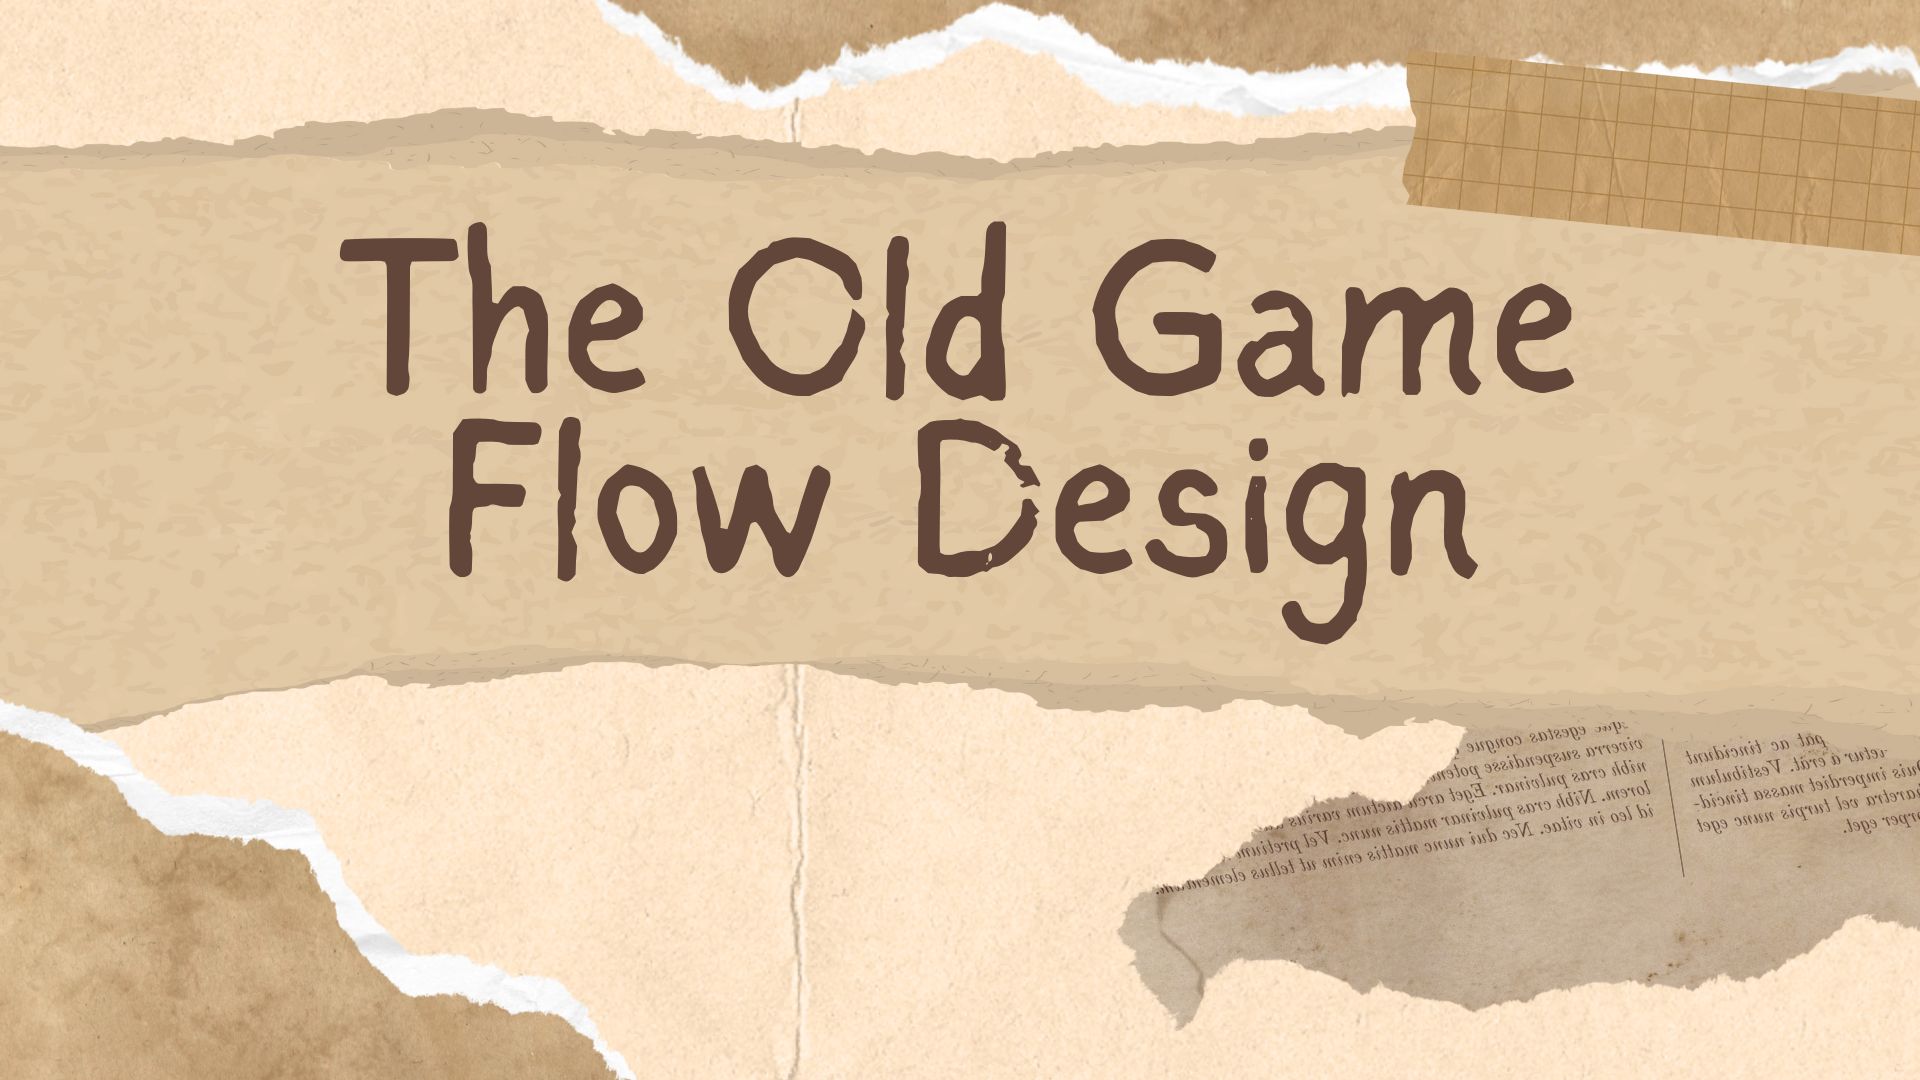 The Old Game Flow Design